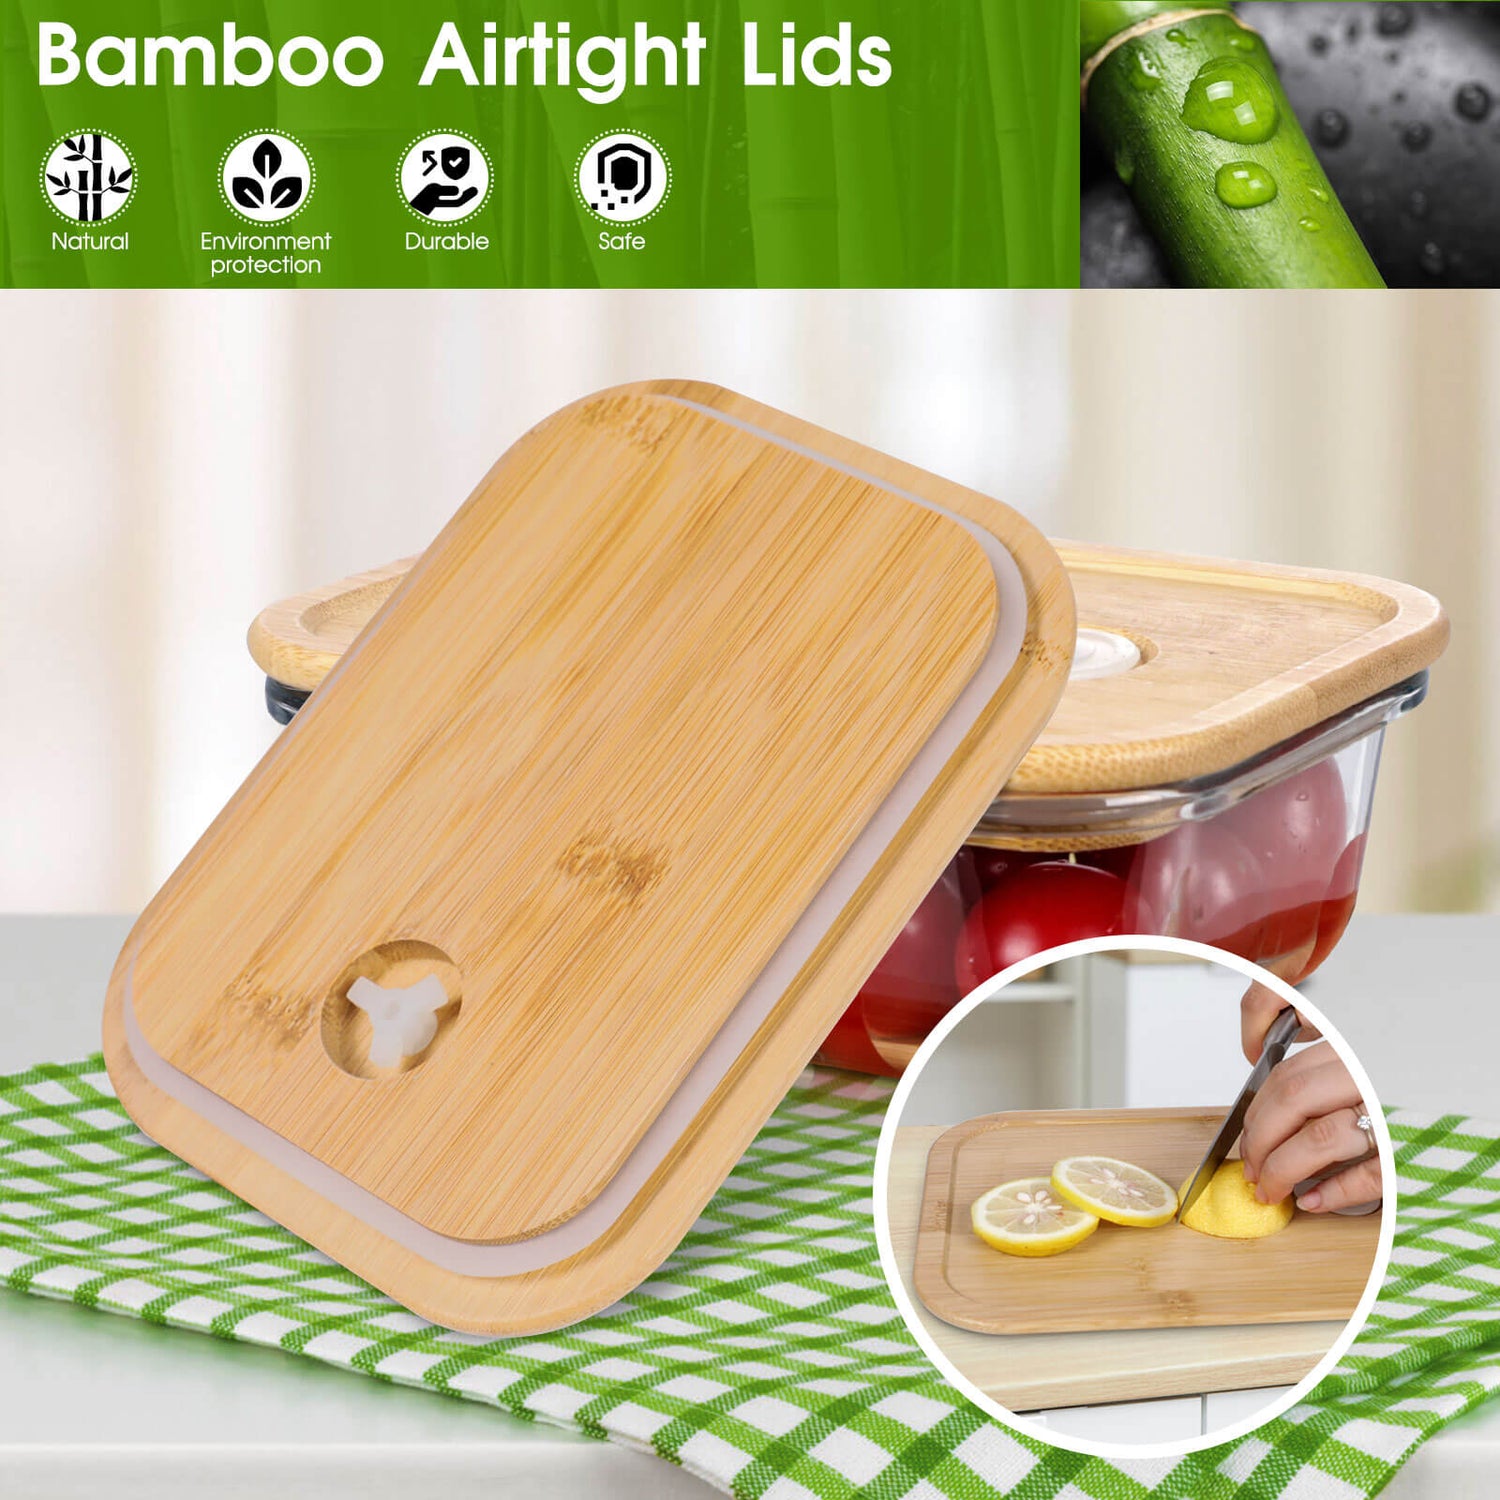  Glass Food Storage Containers with Lids (Bamboo) - 4 Piece  Value Set - The Most Ecofriendly Glass Containers for Food Storage with Lids  - Airtight, Glass Meal Prep Containers or Glass